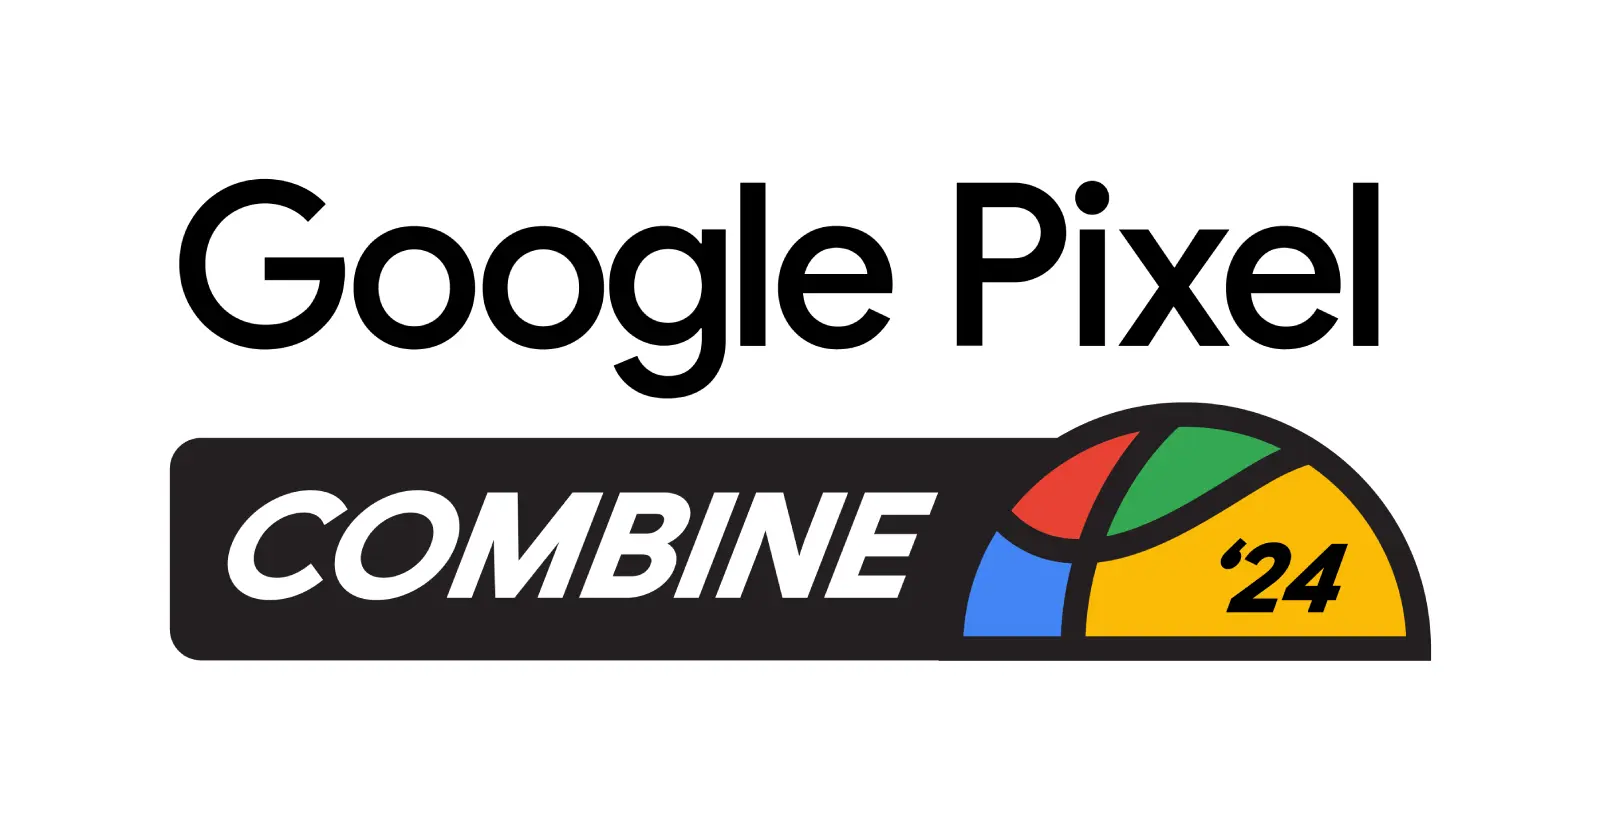 Don't miss your chance to shine and score premium giveaways at Google Pixel Combine - RSVP today!